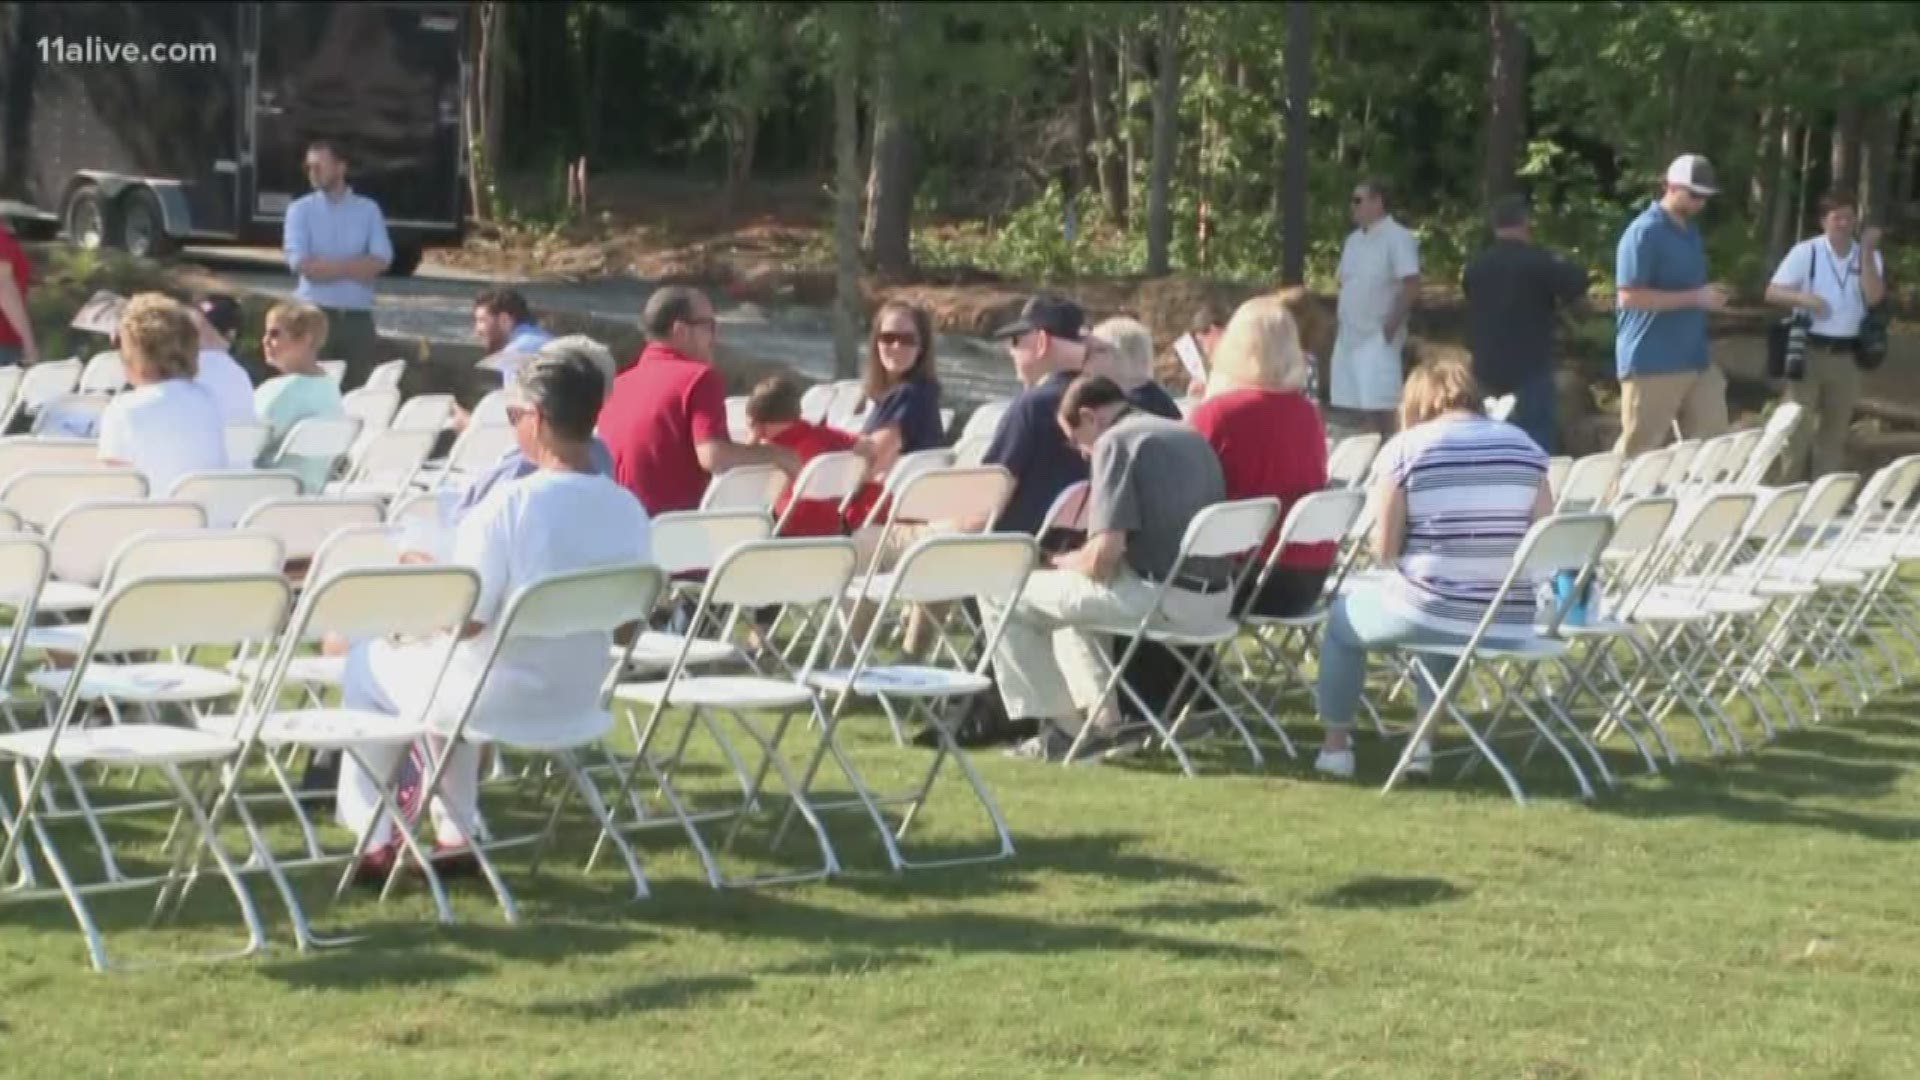 Officials in Peachtree Corners unveiled a new veterans memorial on Saturday, June 15.